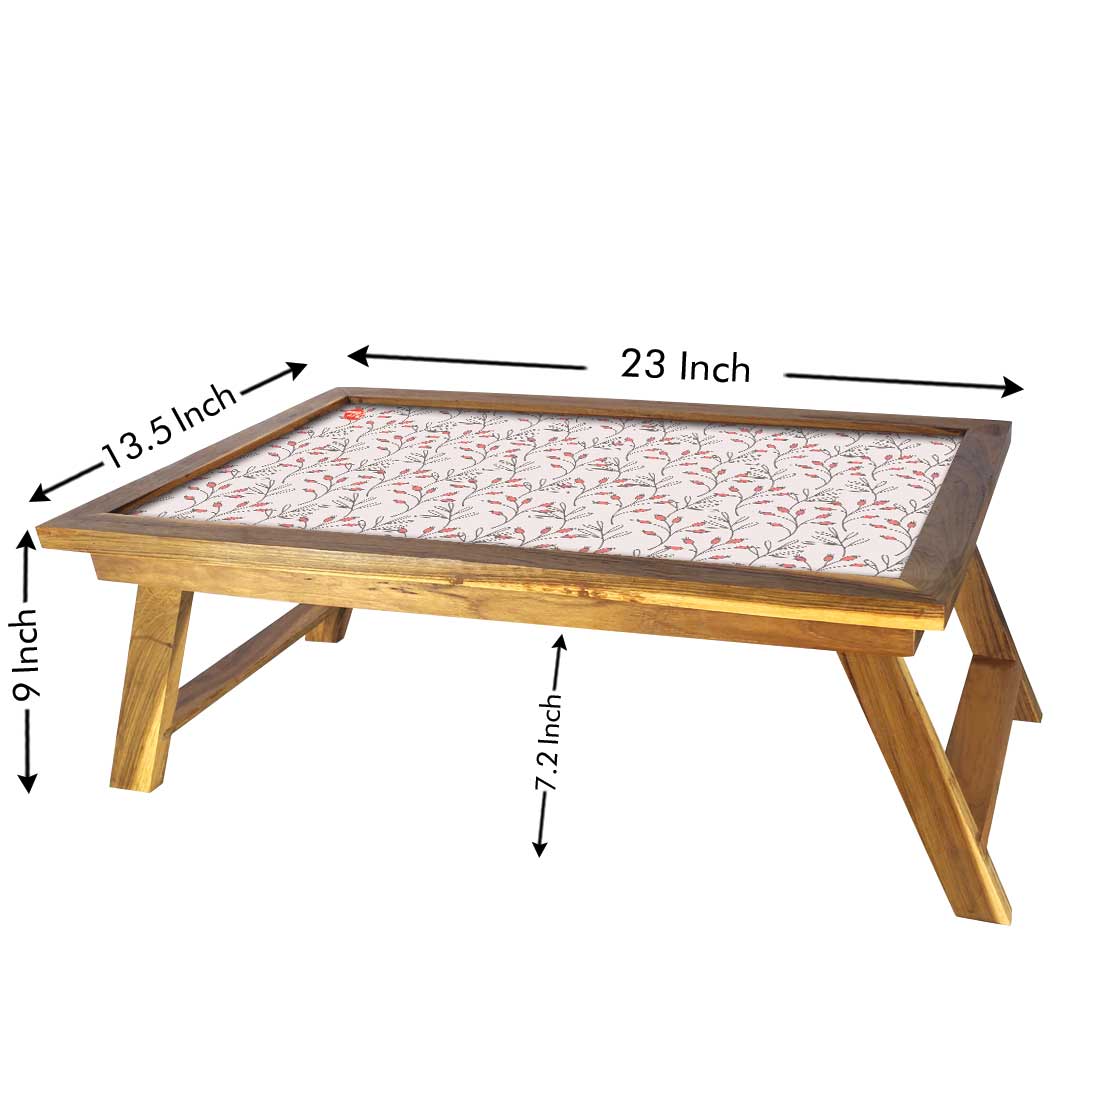 Wooden Bed Breakfast Tray for Home Eating Study Table - Beautiful Floral Nutcase